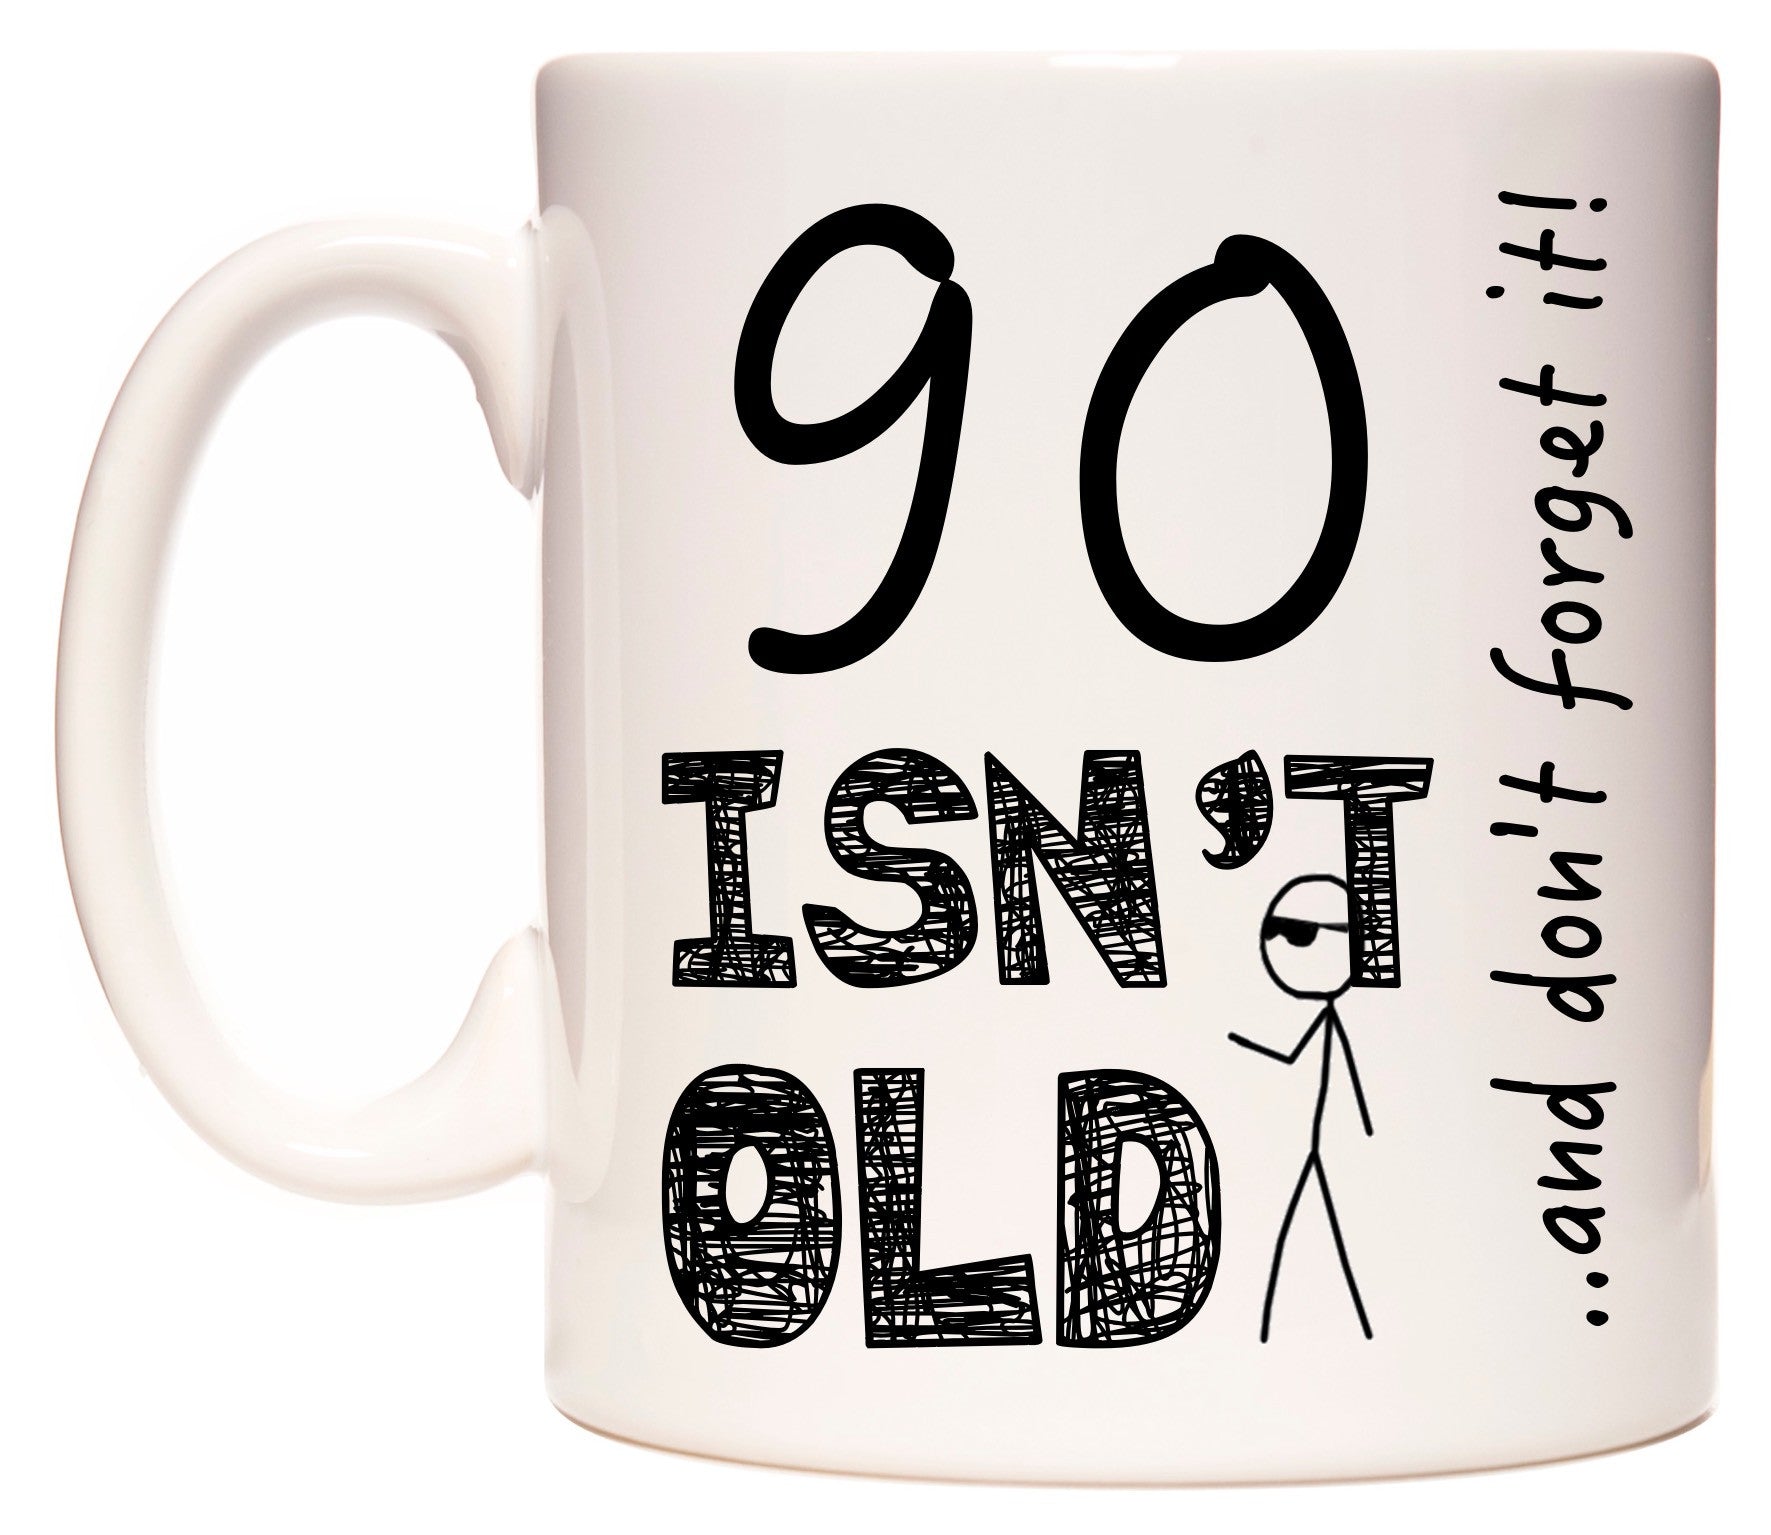 This mug features 90 Isn't Old